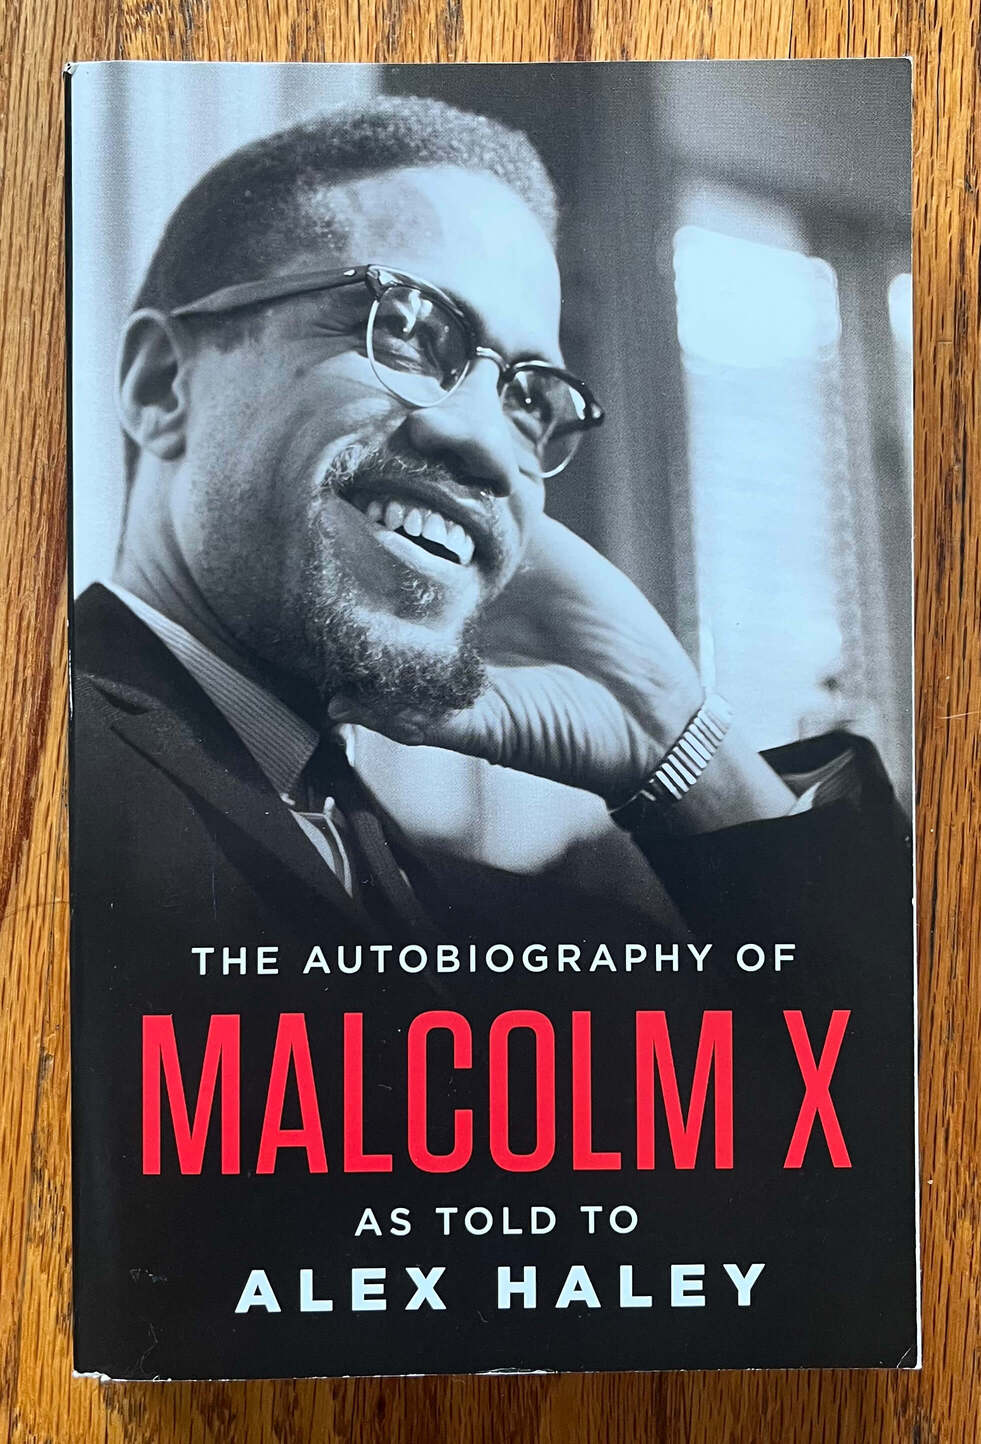 “The Autobiography of Malcom X: As Told To Alex Haley”